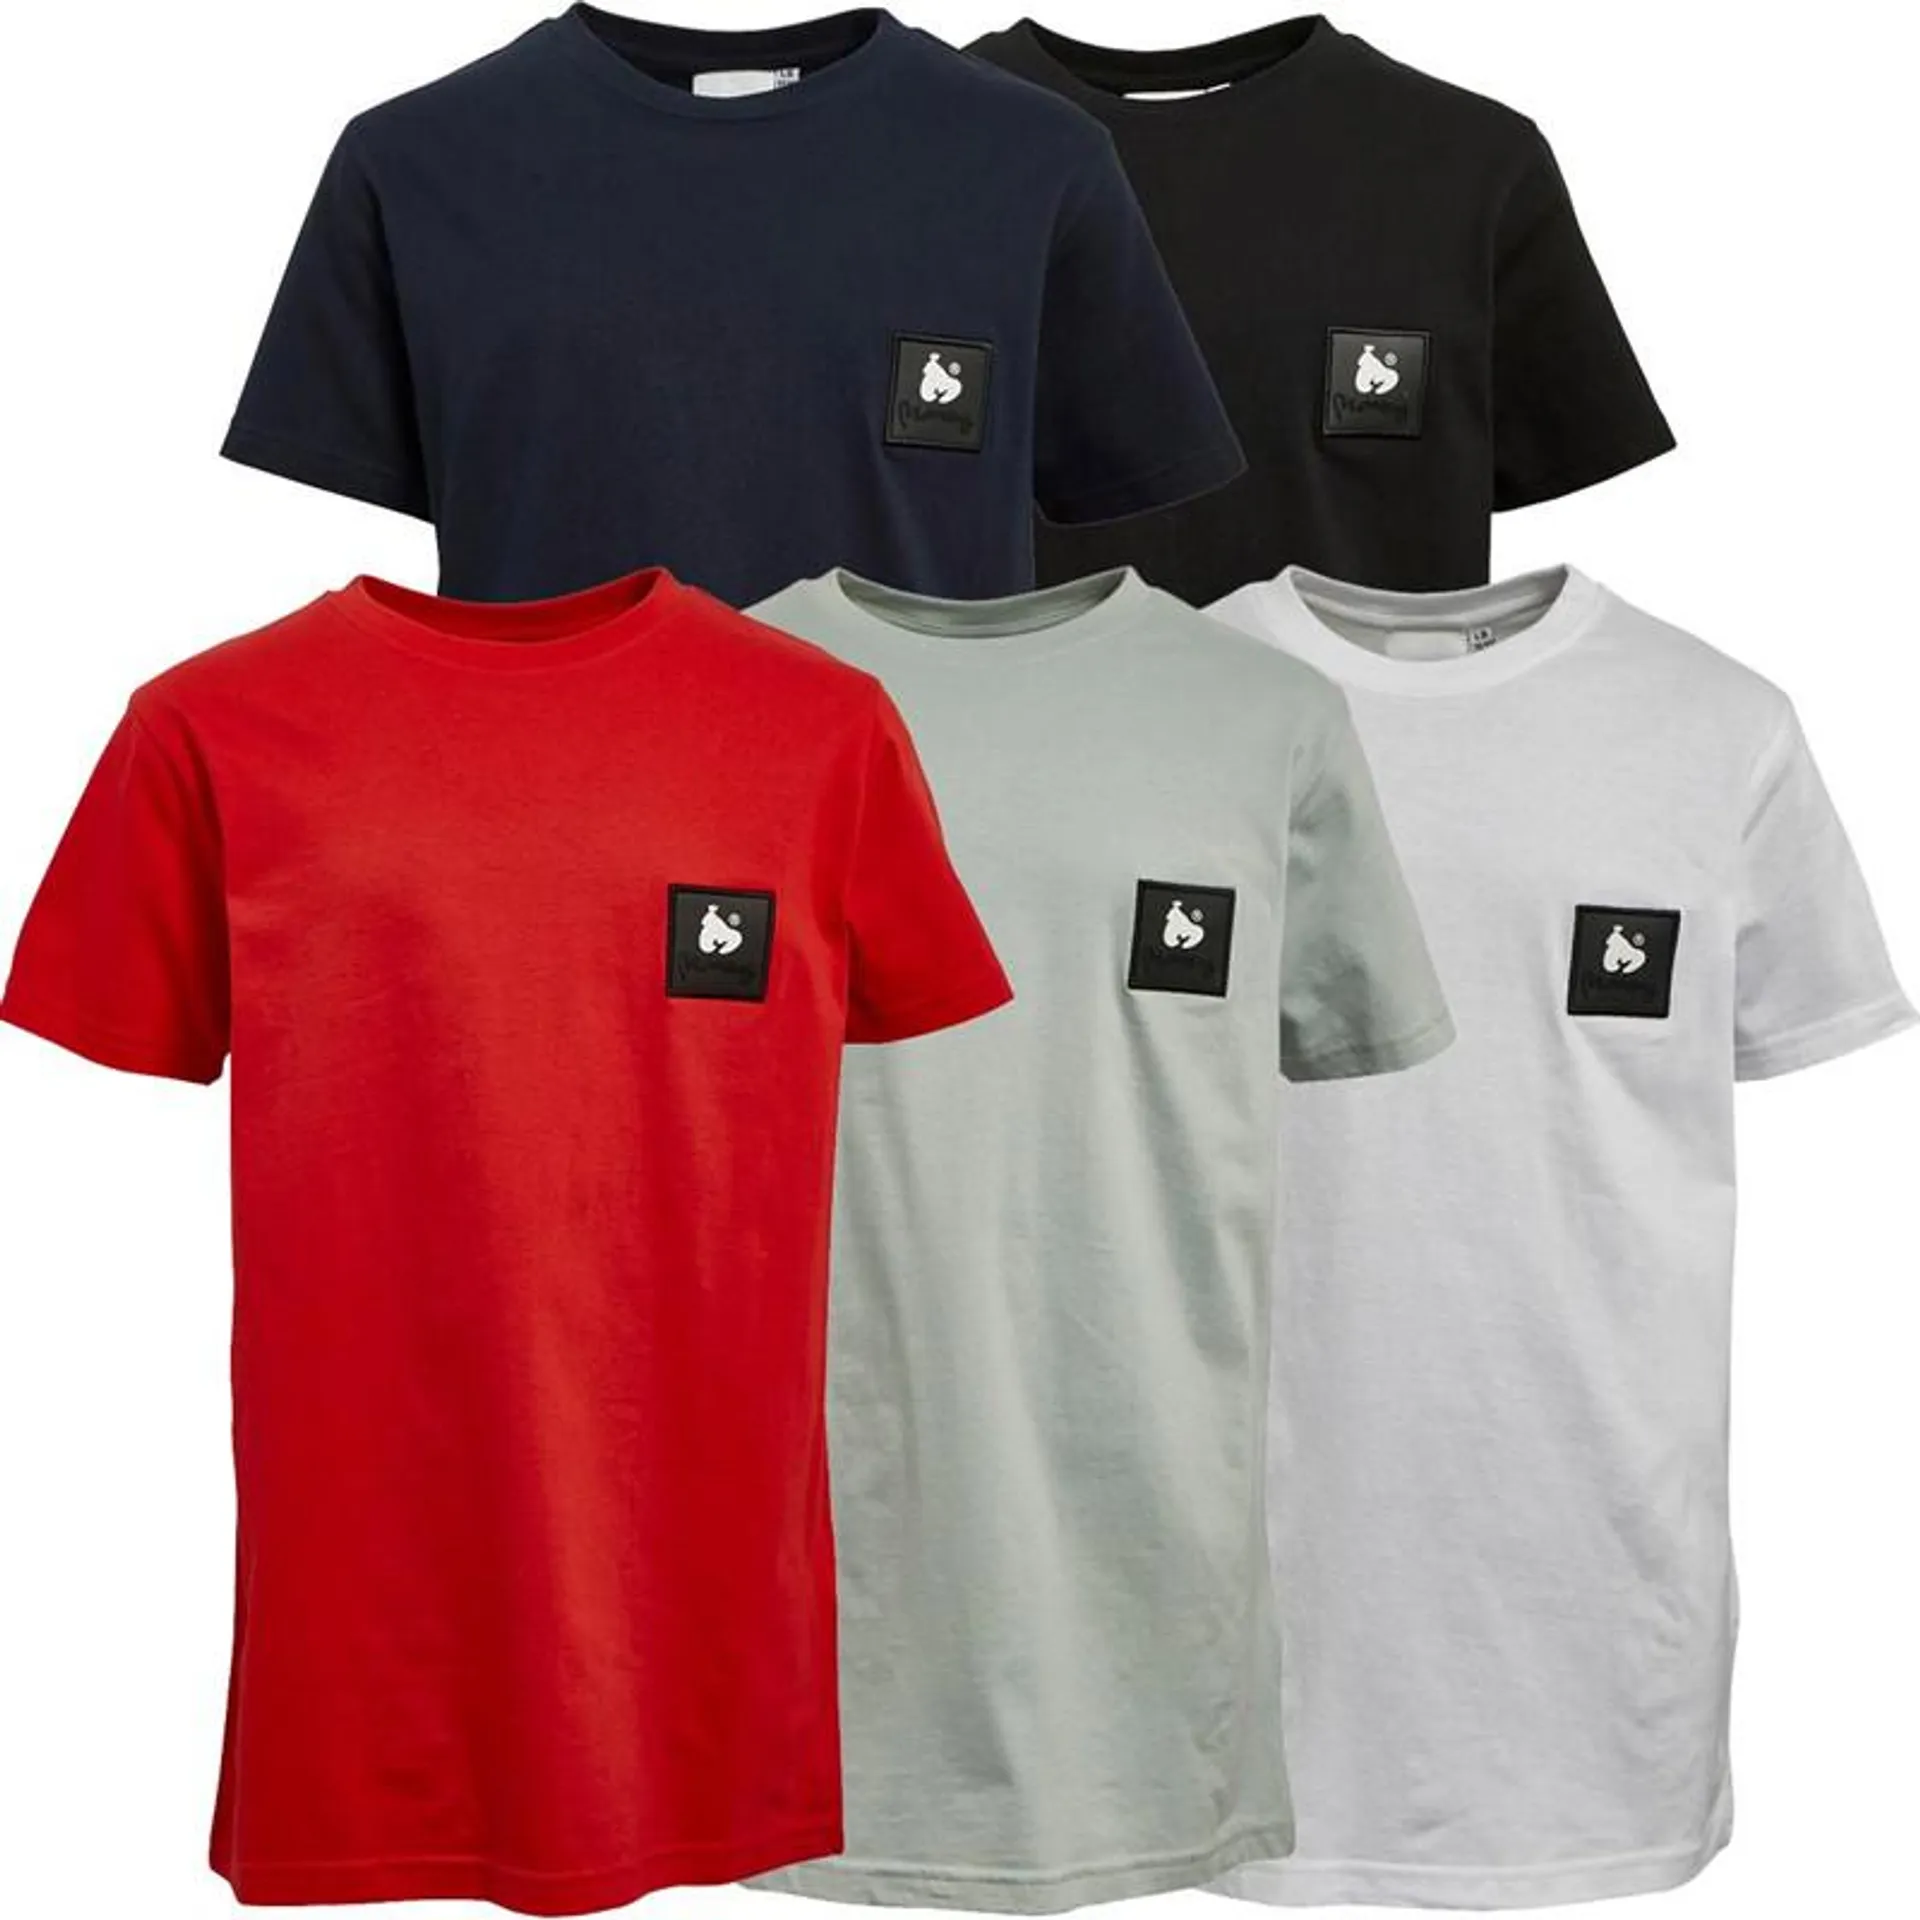 Money Kids Combo Five Pack T-Shirts Black/Navy/Living Coral/Baby Blue/White